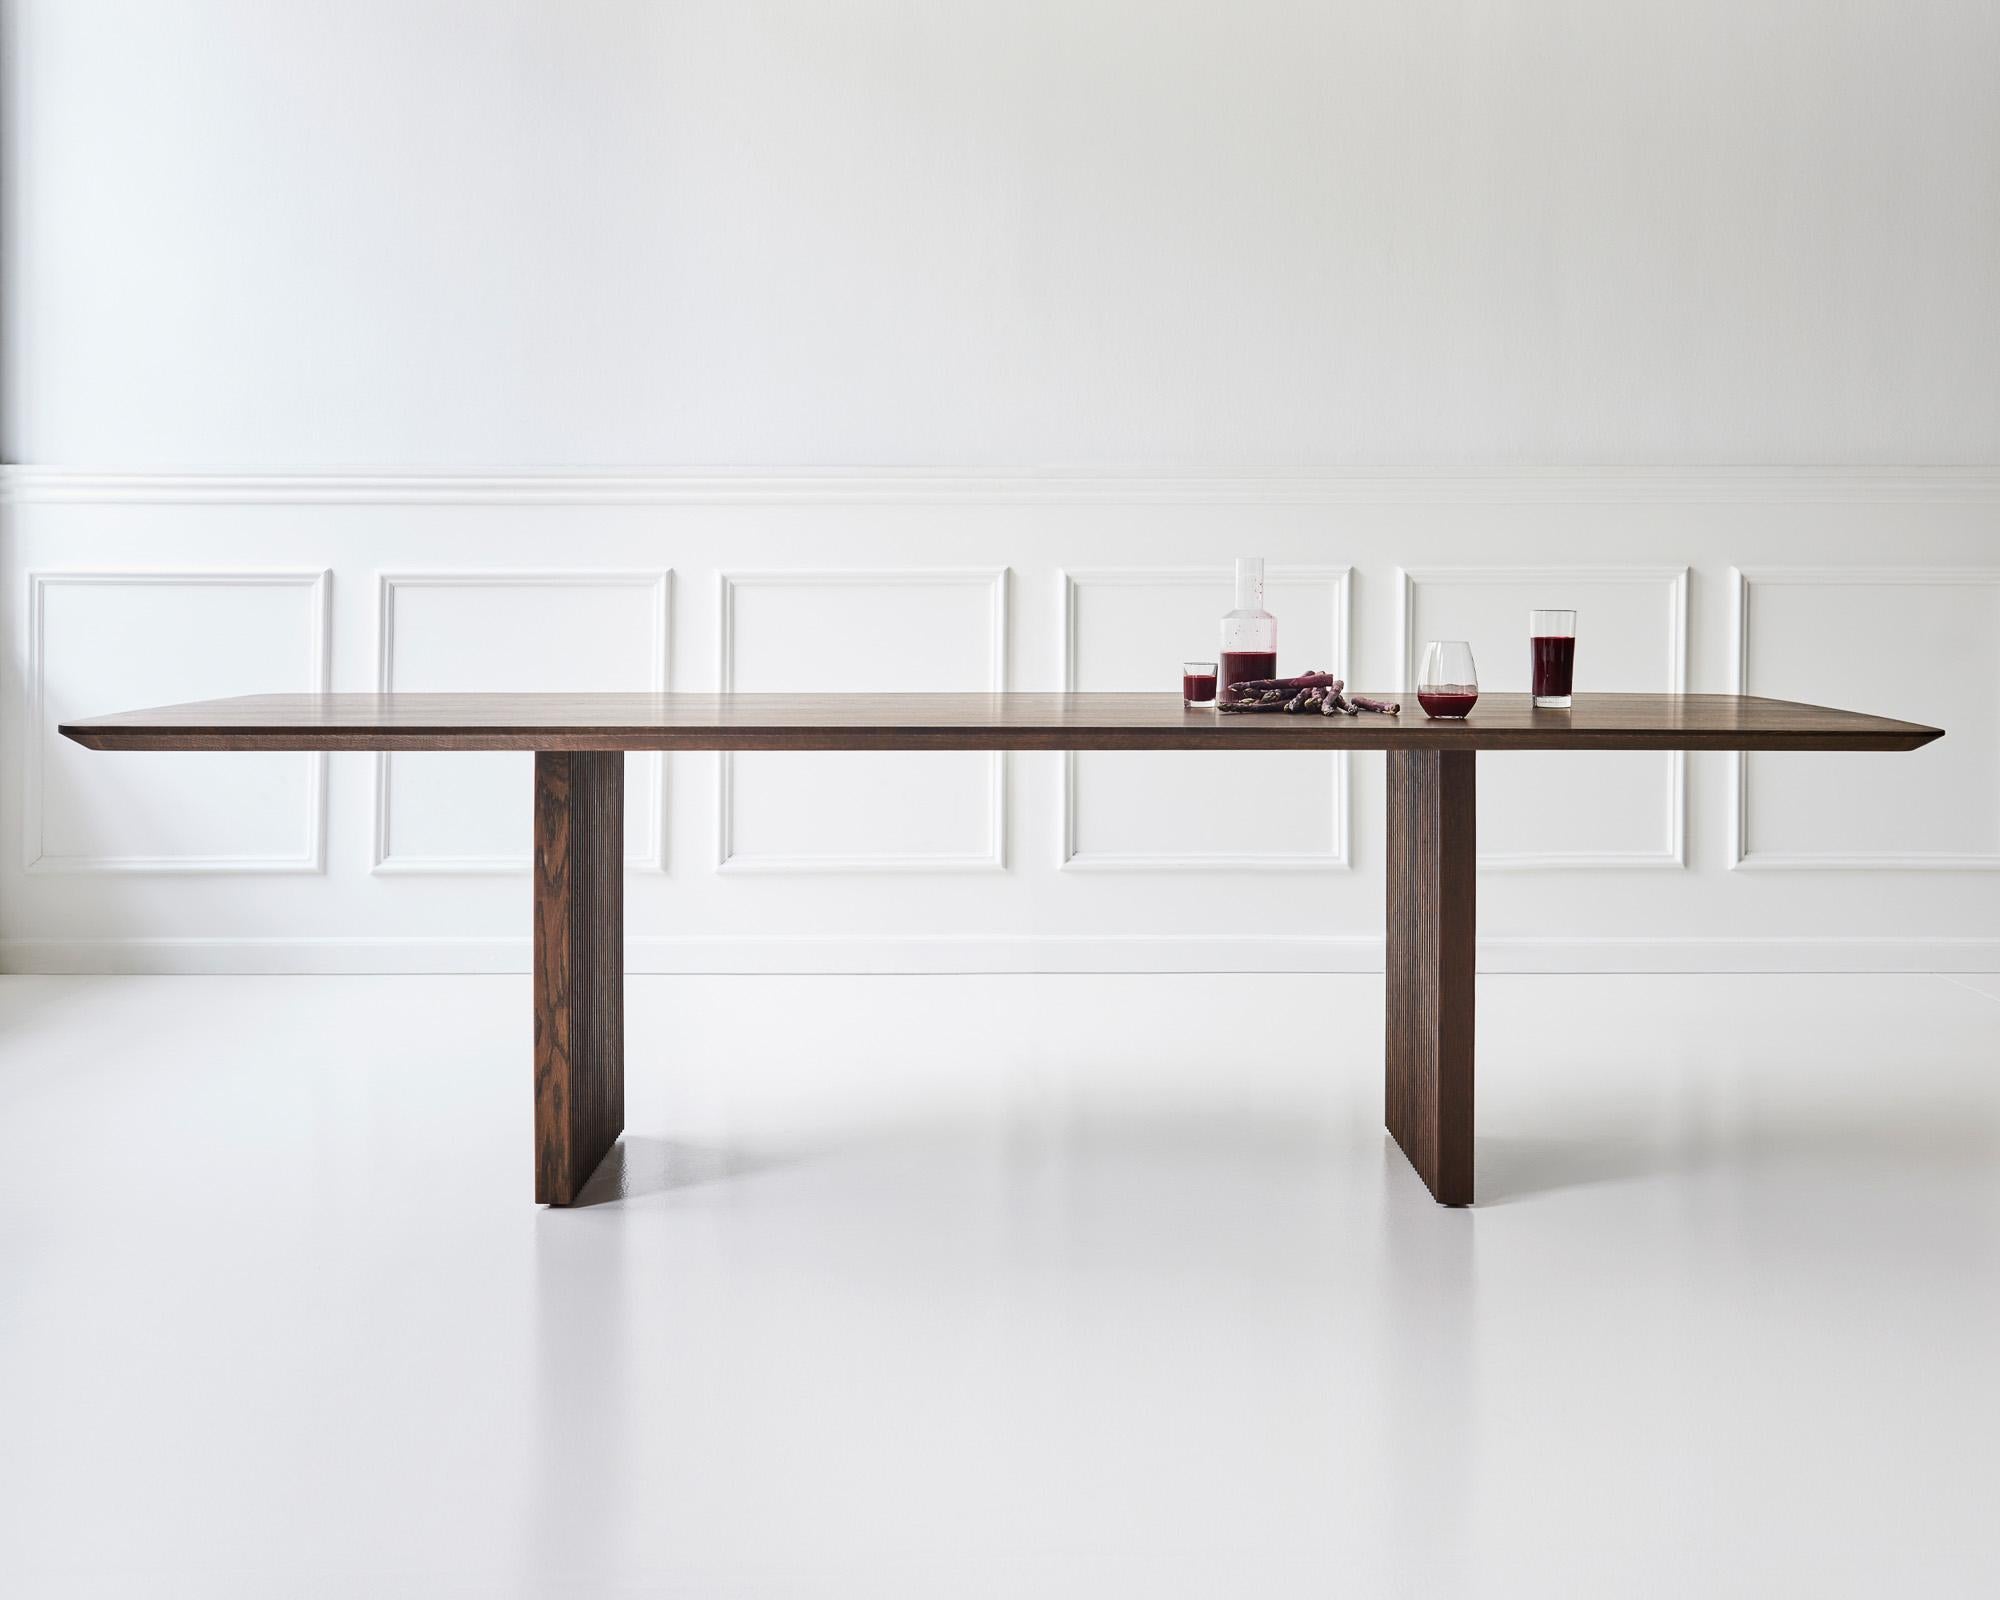 TEN dining table, rectangular, 370cm
Solid wood tabletop and legs

Height: 72 or 74 cm

Tabletop dimensions:
– 200 x 95 cm
– 240 x 105 cm
– 270 x 105 cm
– 300 x 105 cm
– 340 x 105 cm
– 370 x 105 cm
– 400 x 105 cm

Tabletop’s thickness: